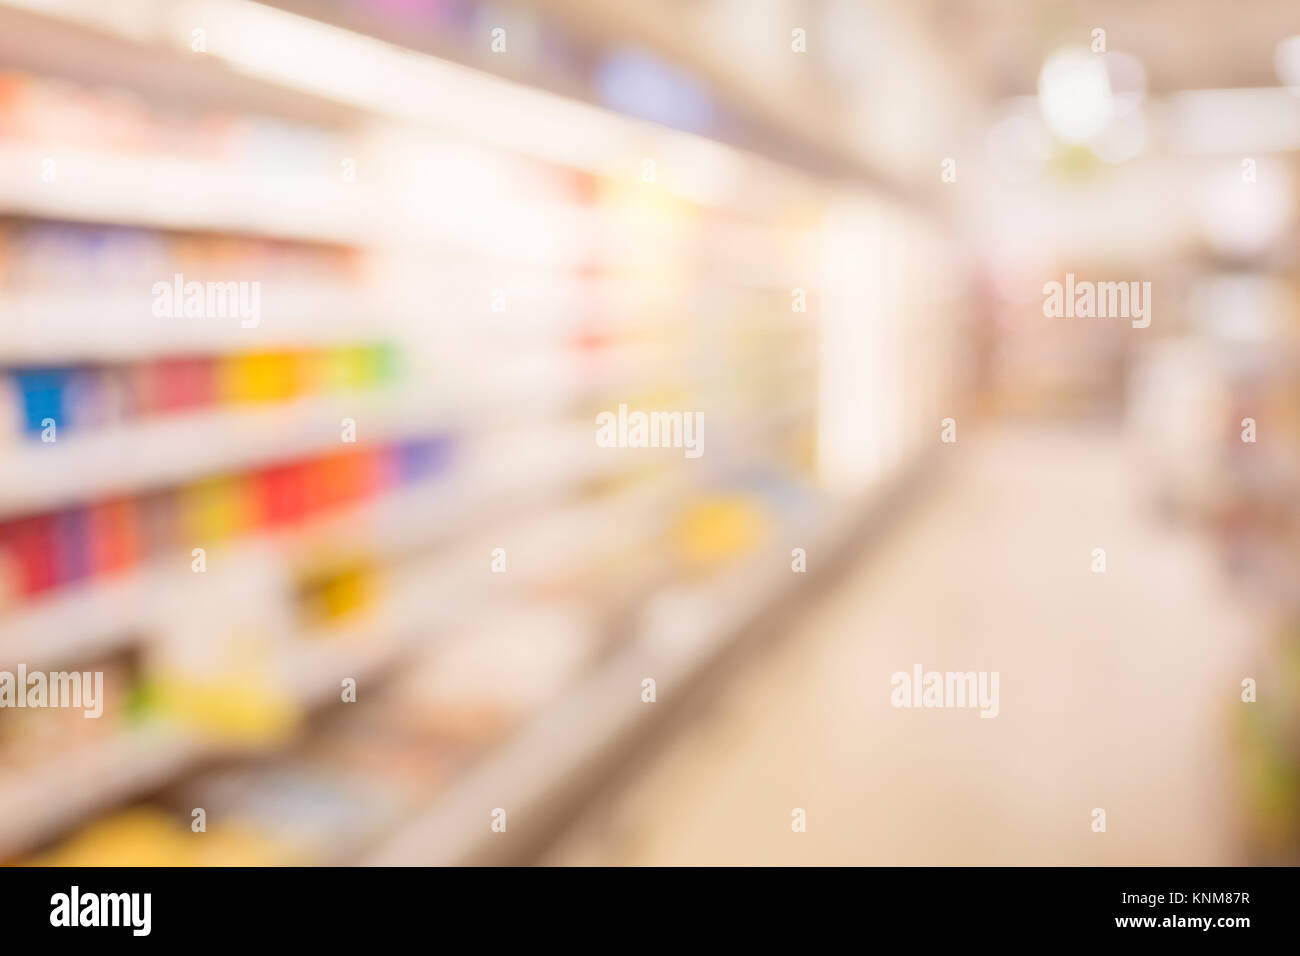 Blurred supermarket pass with colorful shelves as background. Stock Photo